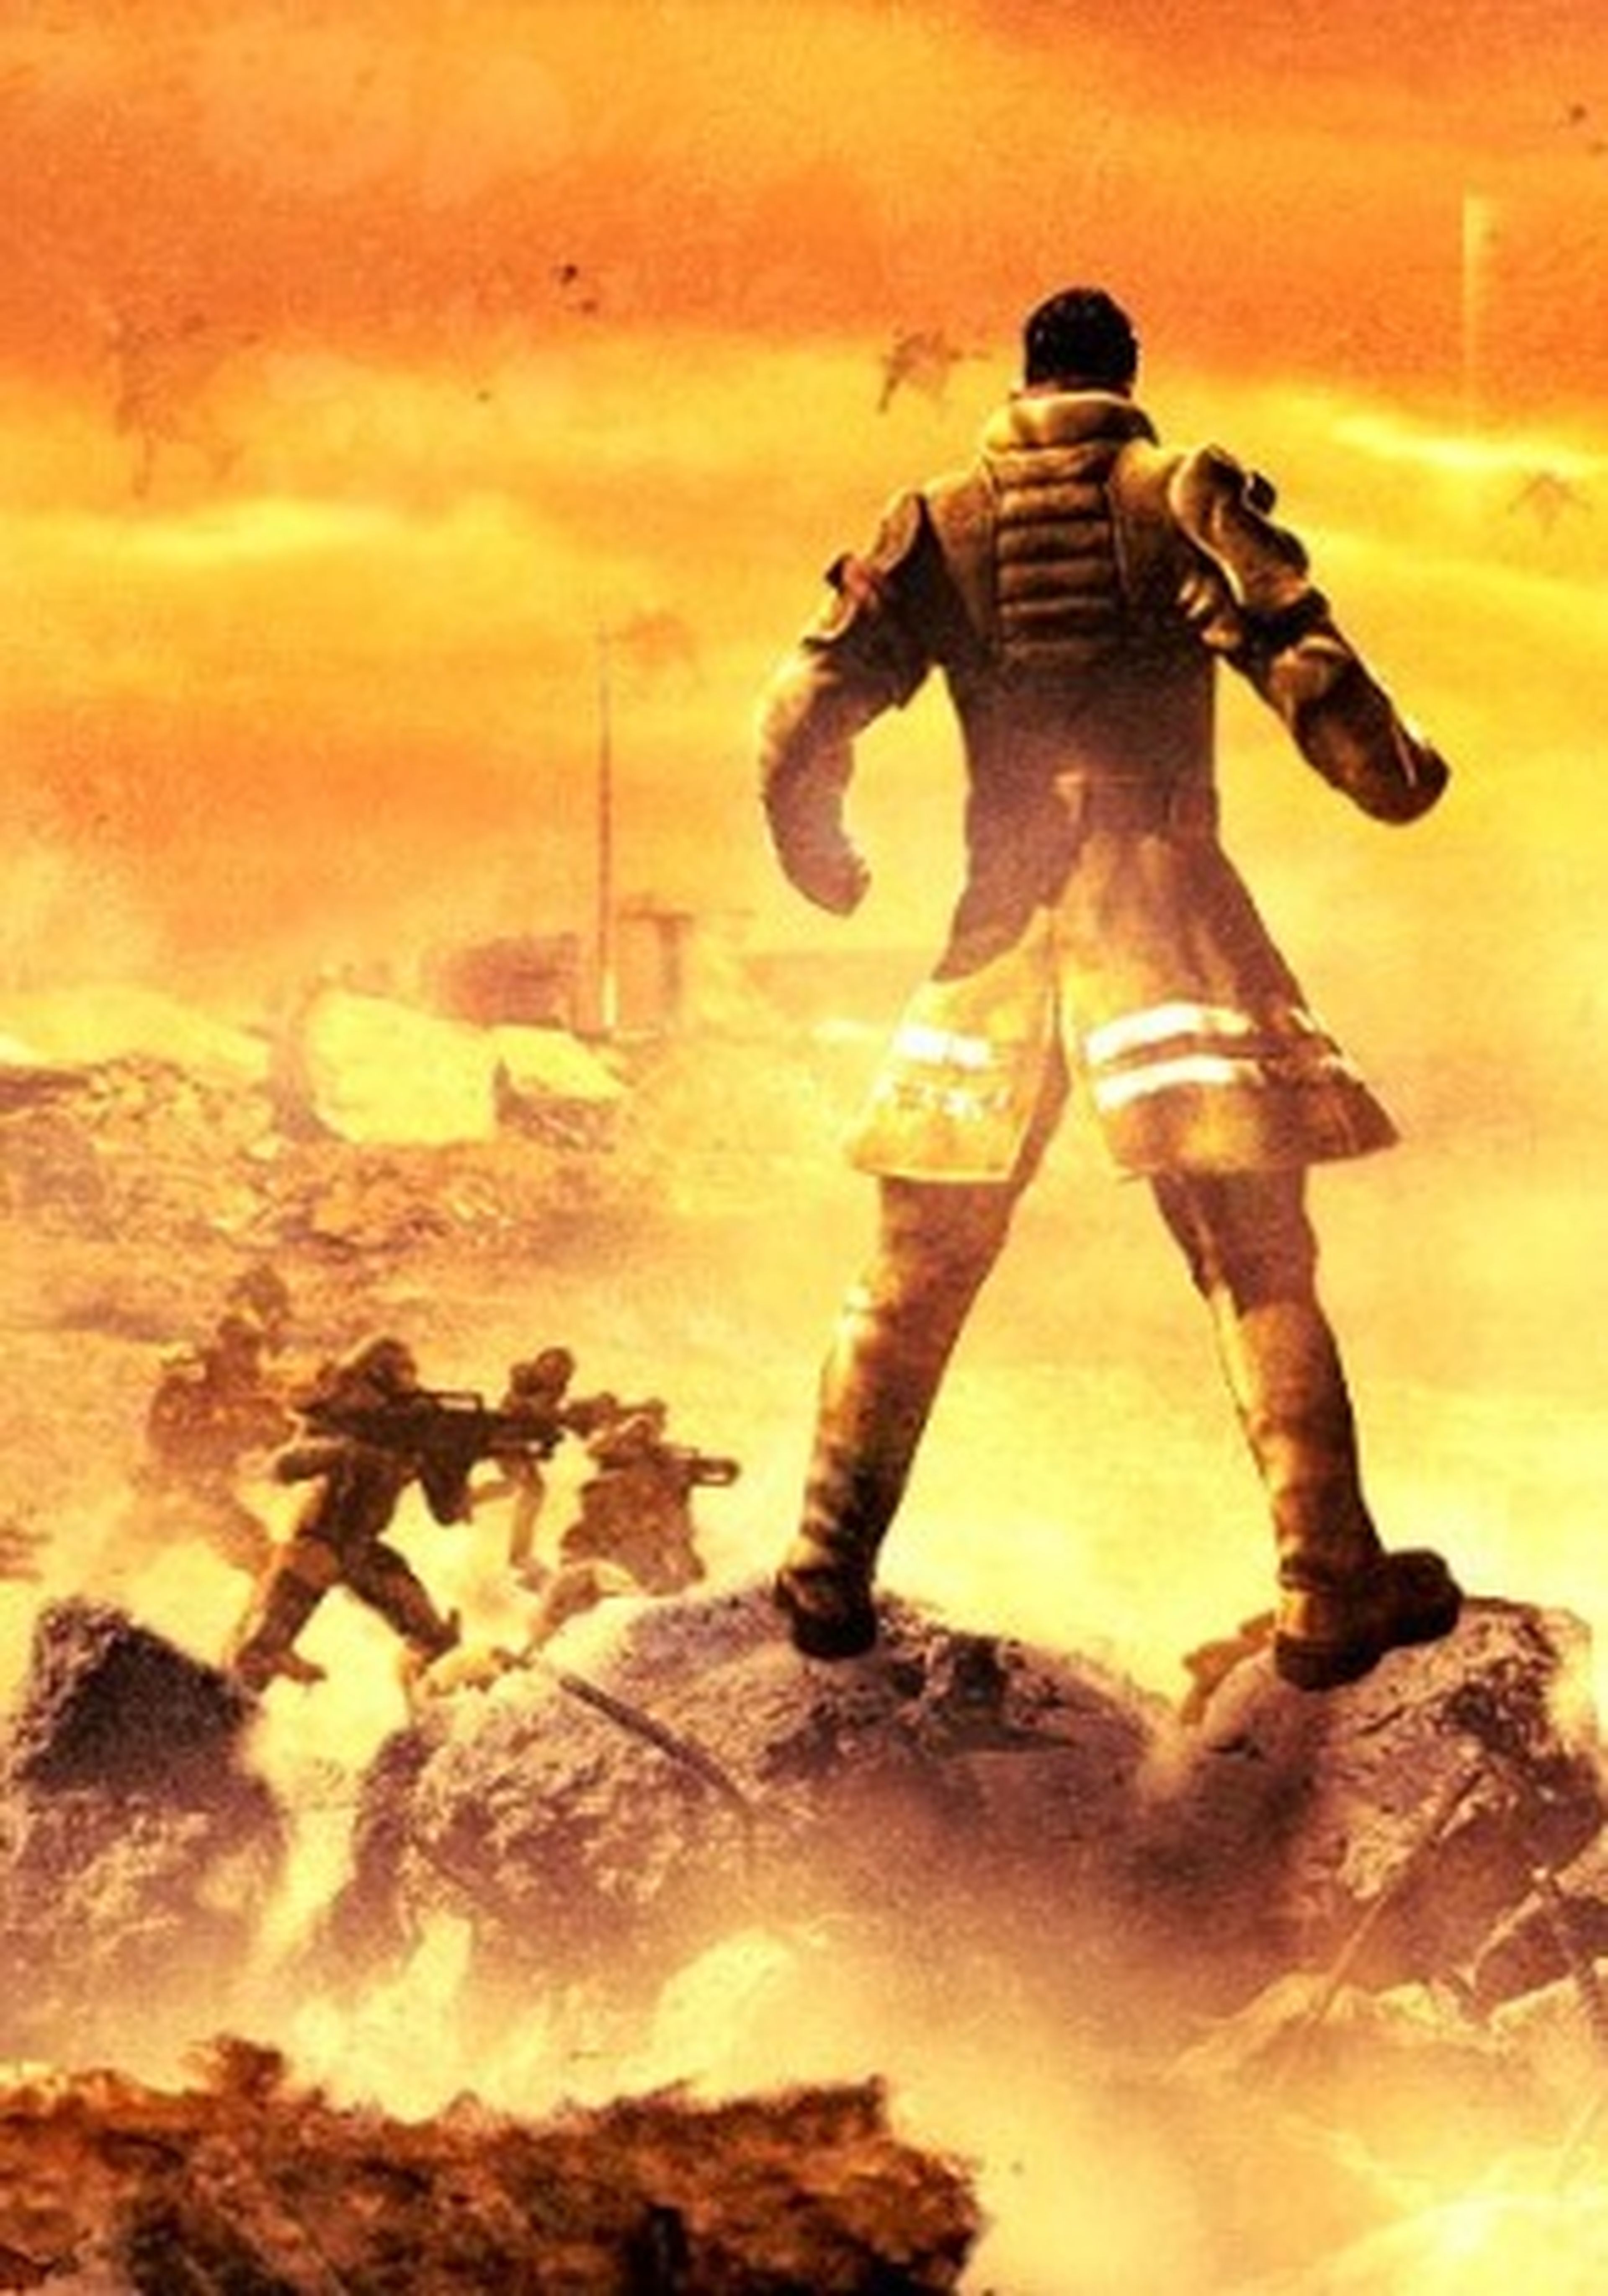 red faction re-mars-tered cover